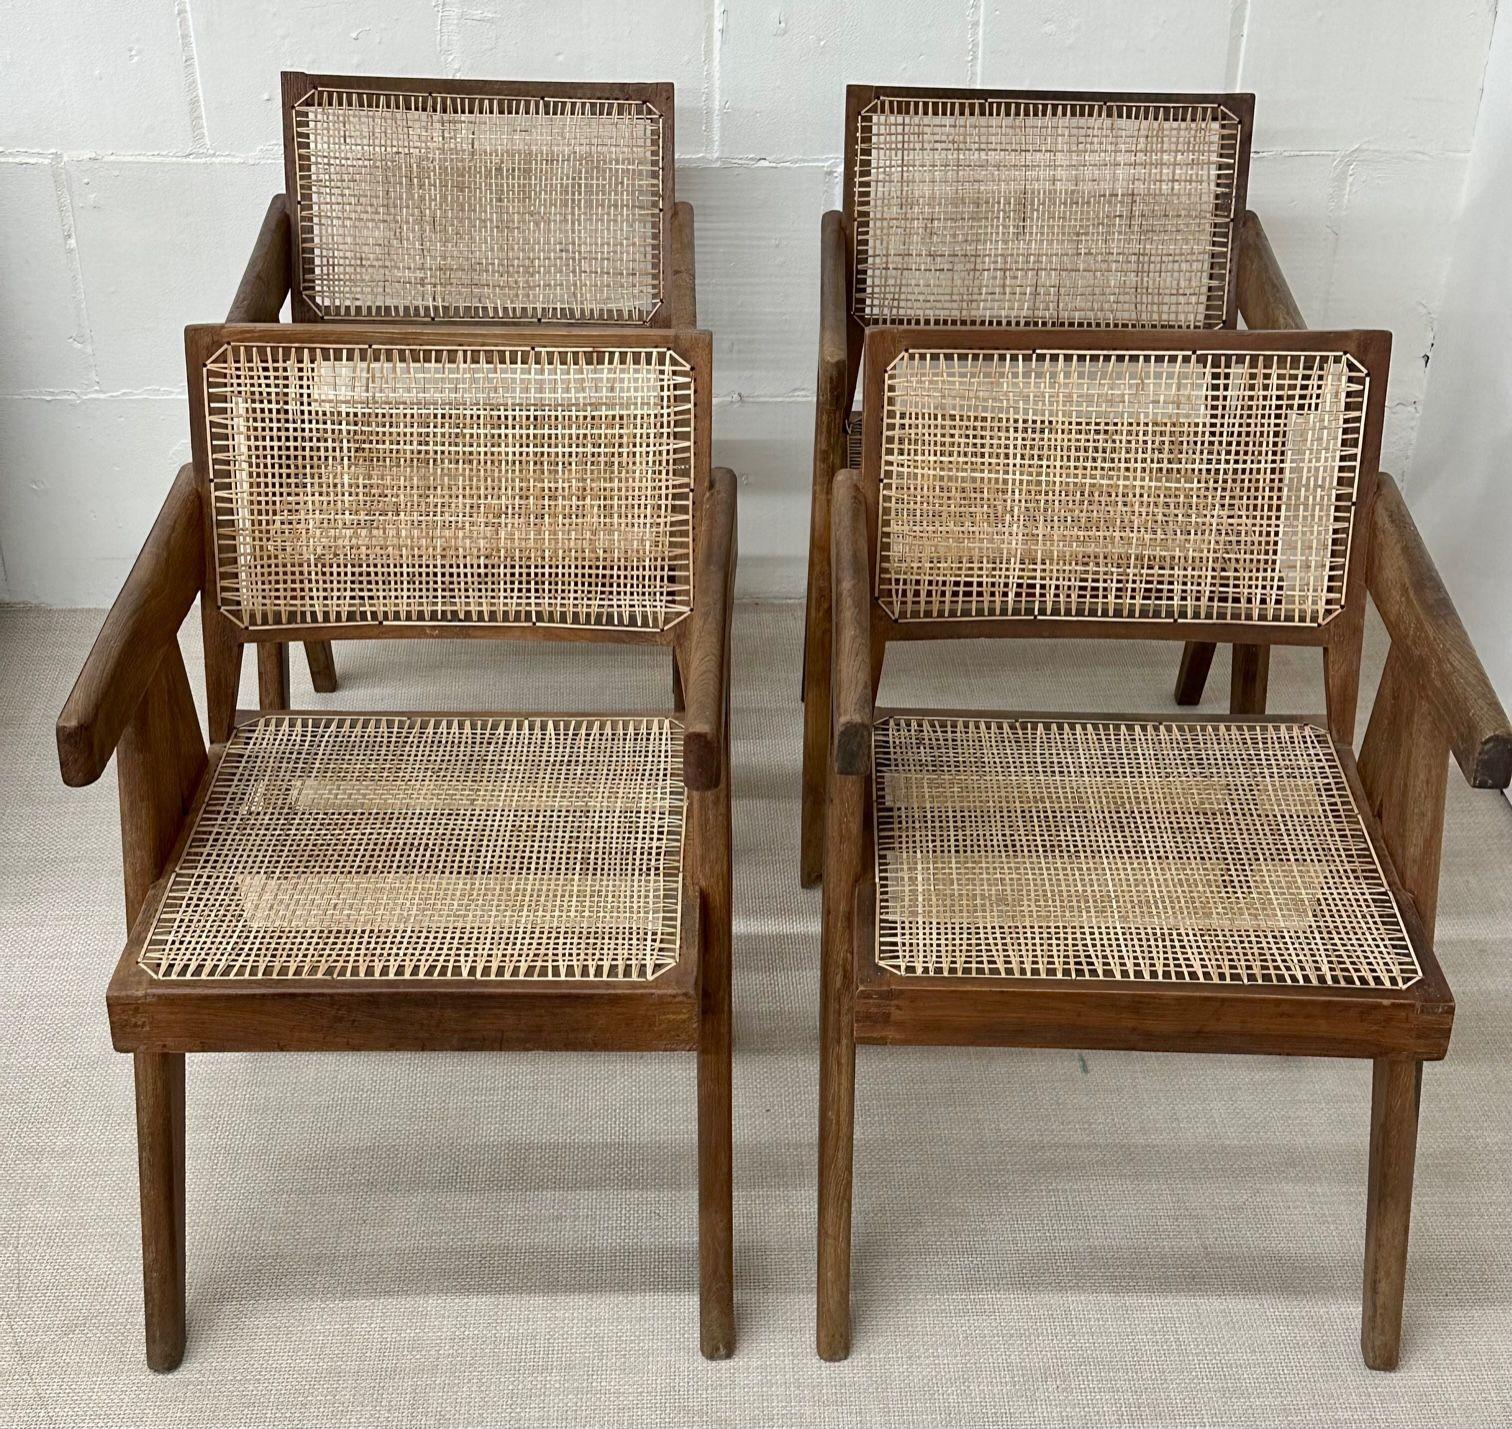 Pierre Jeanneret, Mid-Century Modern, Dining Chairs, Teak, Cane, India, 1960s 11